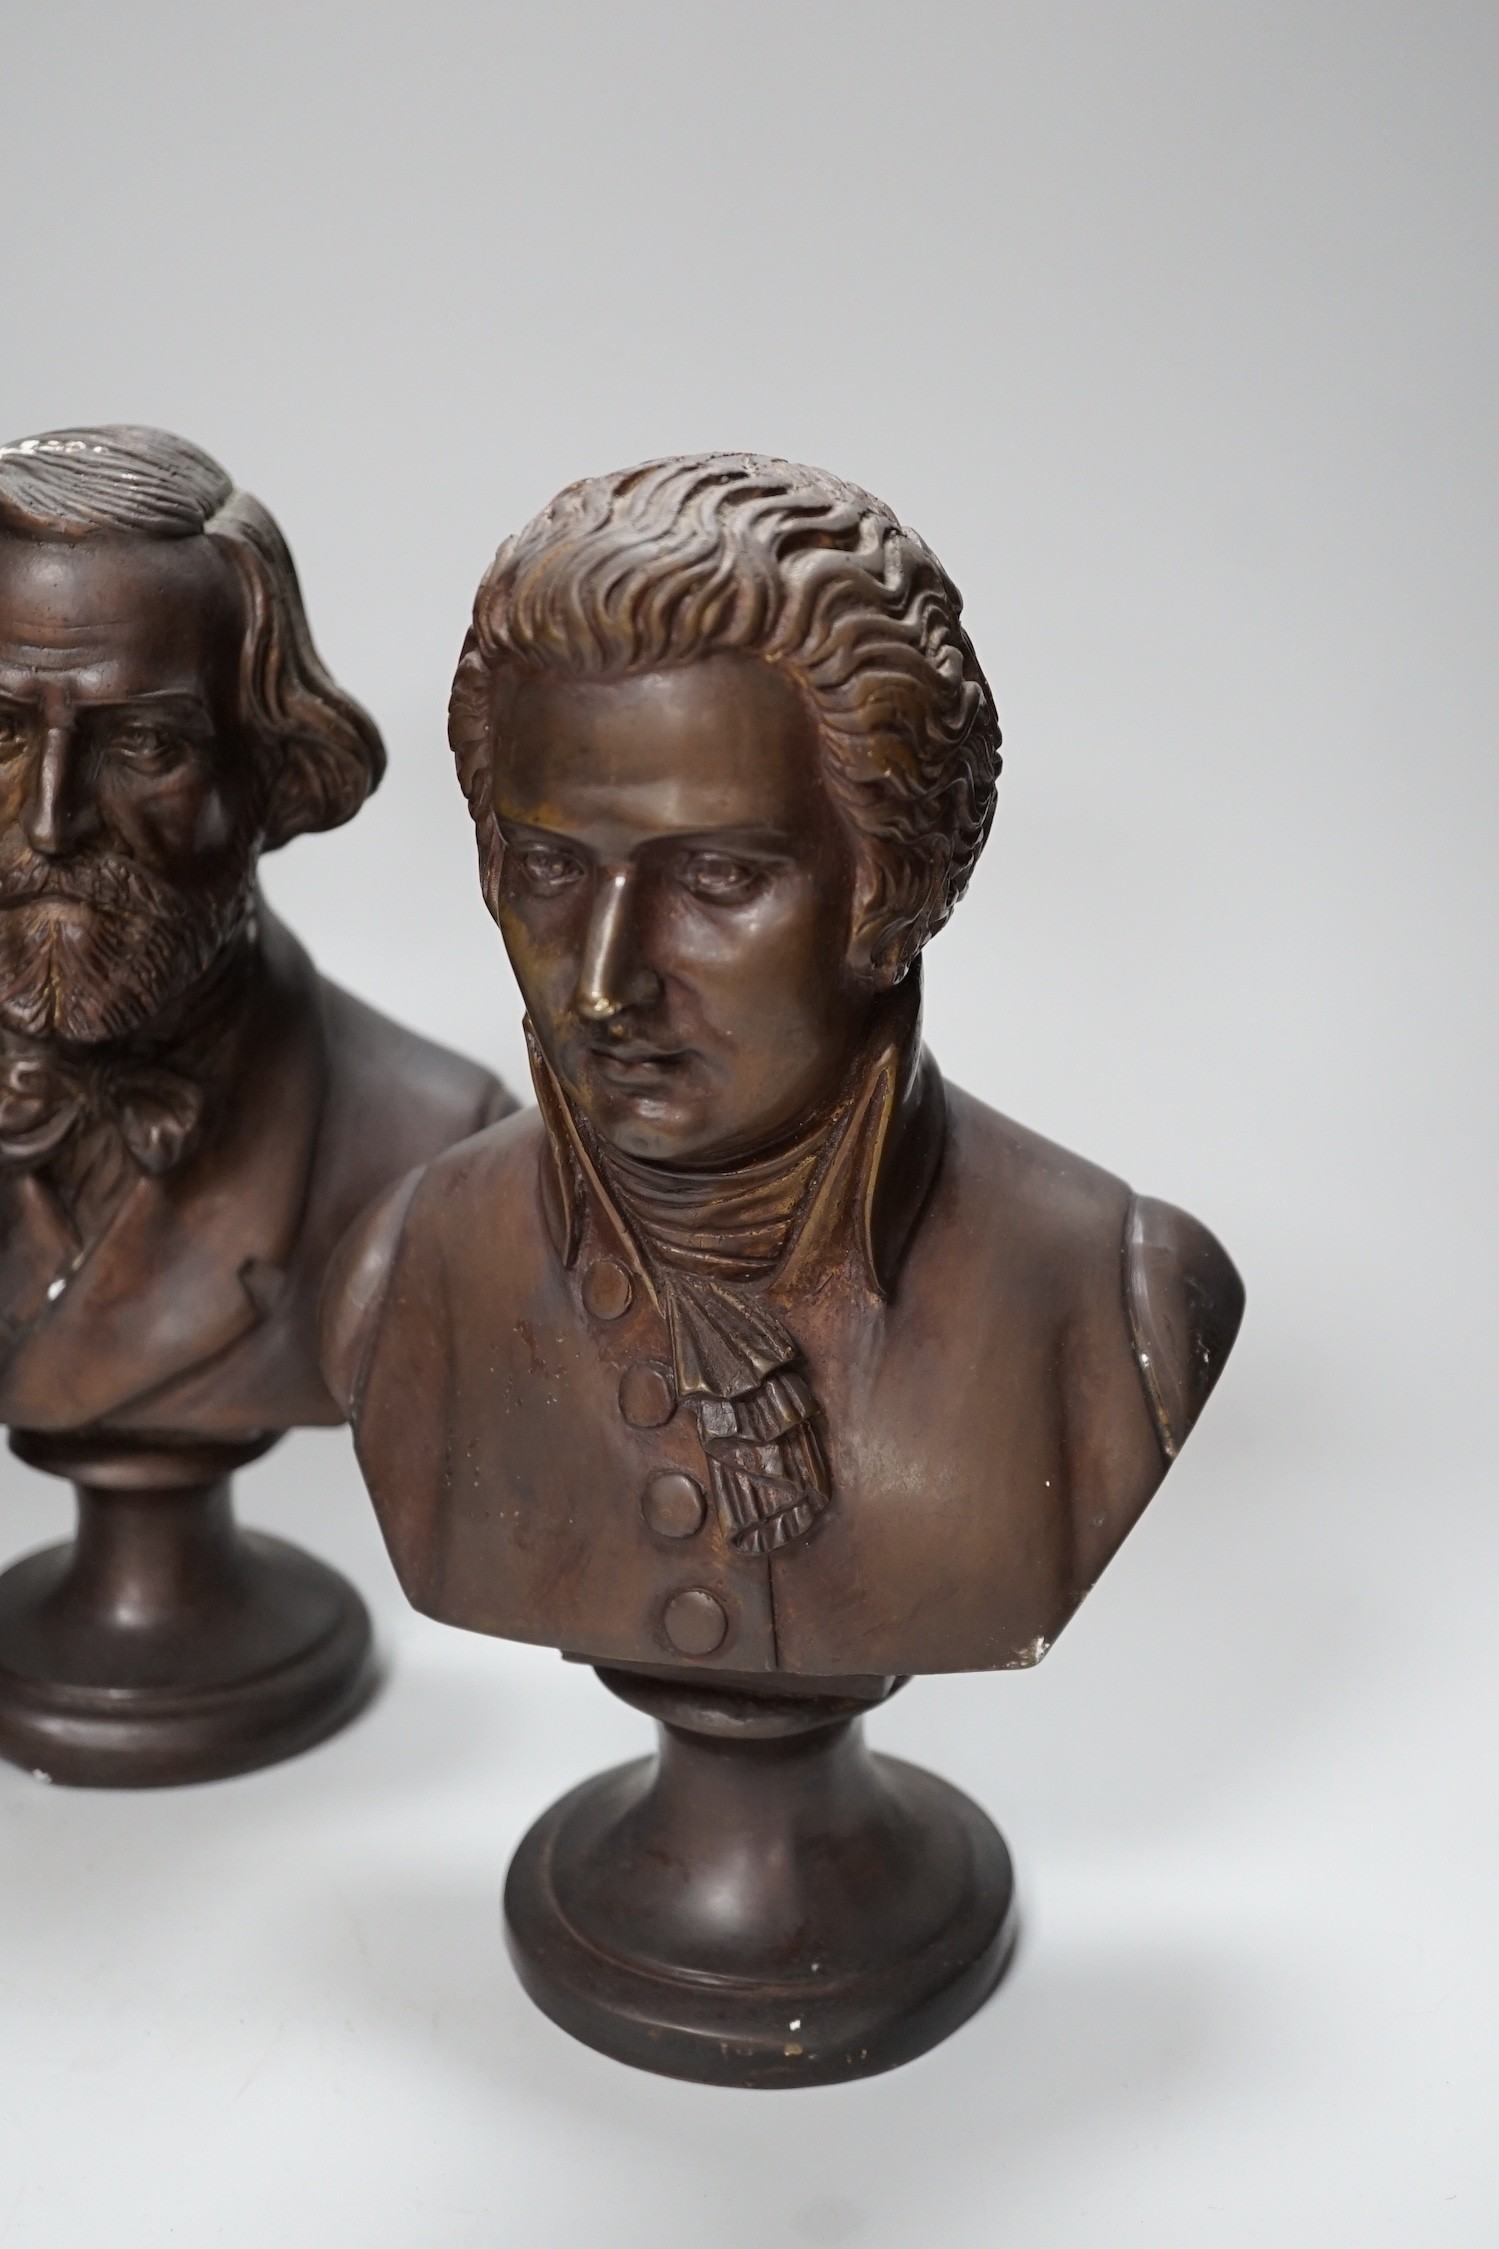 A set of four bronze busts of composers: Schubert, Wagner, Verdi and Mozart, 14cm high